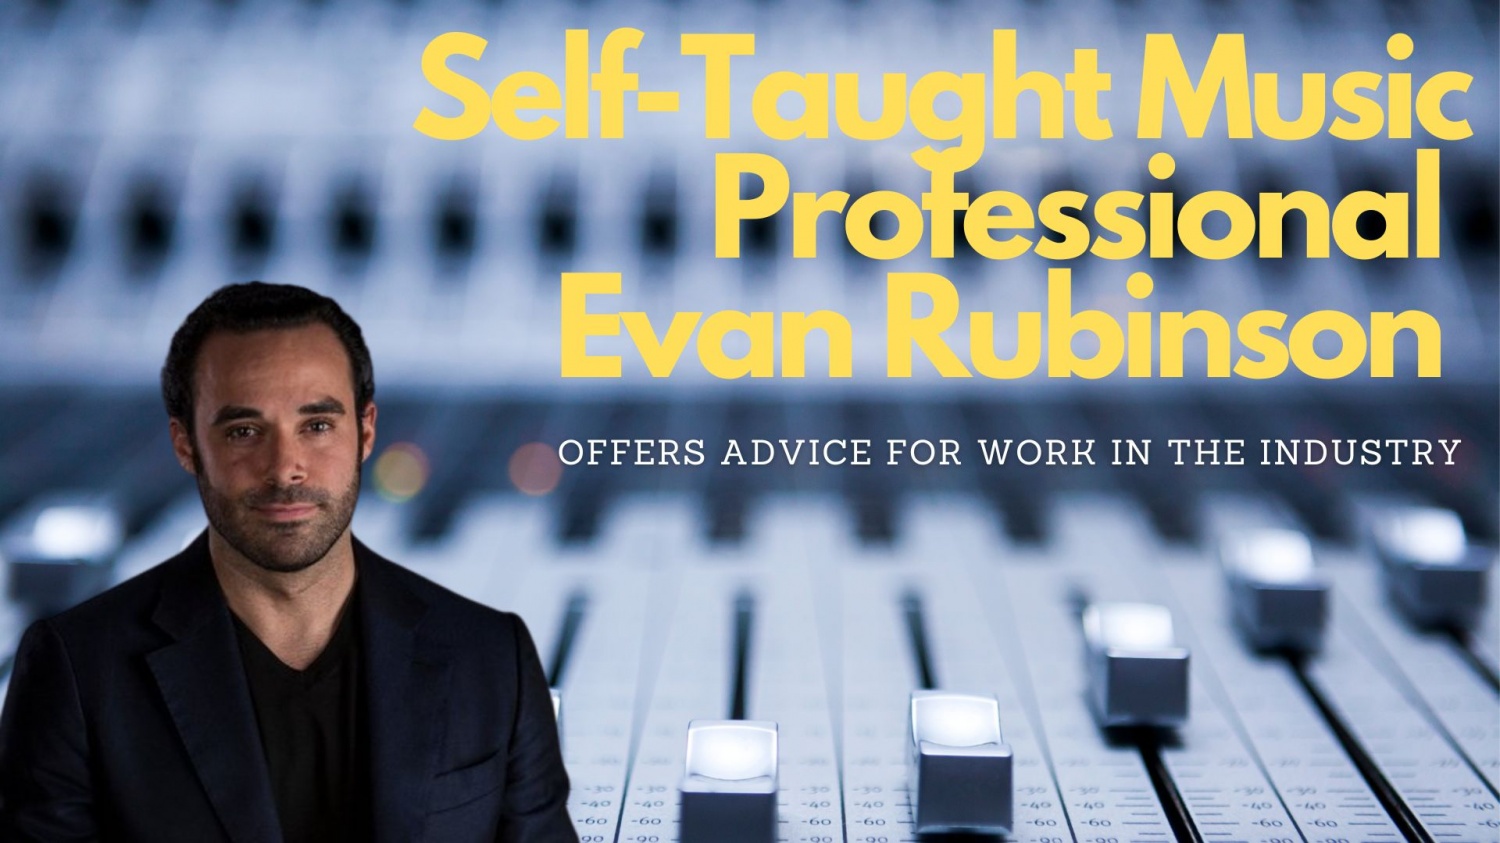 Self-Taught Music Professional Evan Rubinson Offers Advice For Work in the Industry